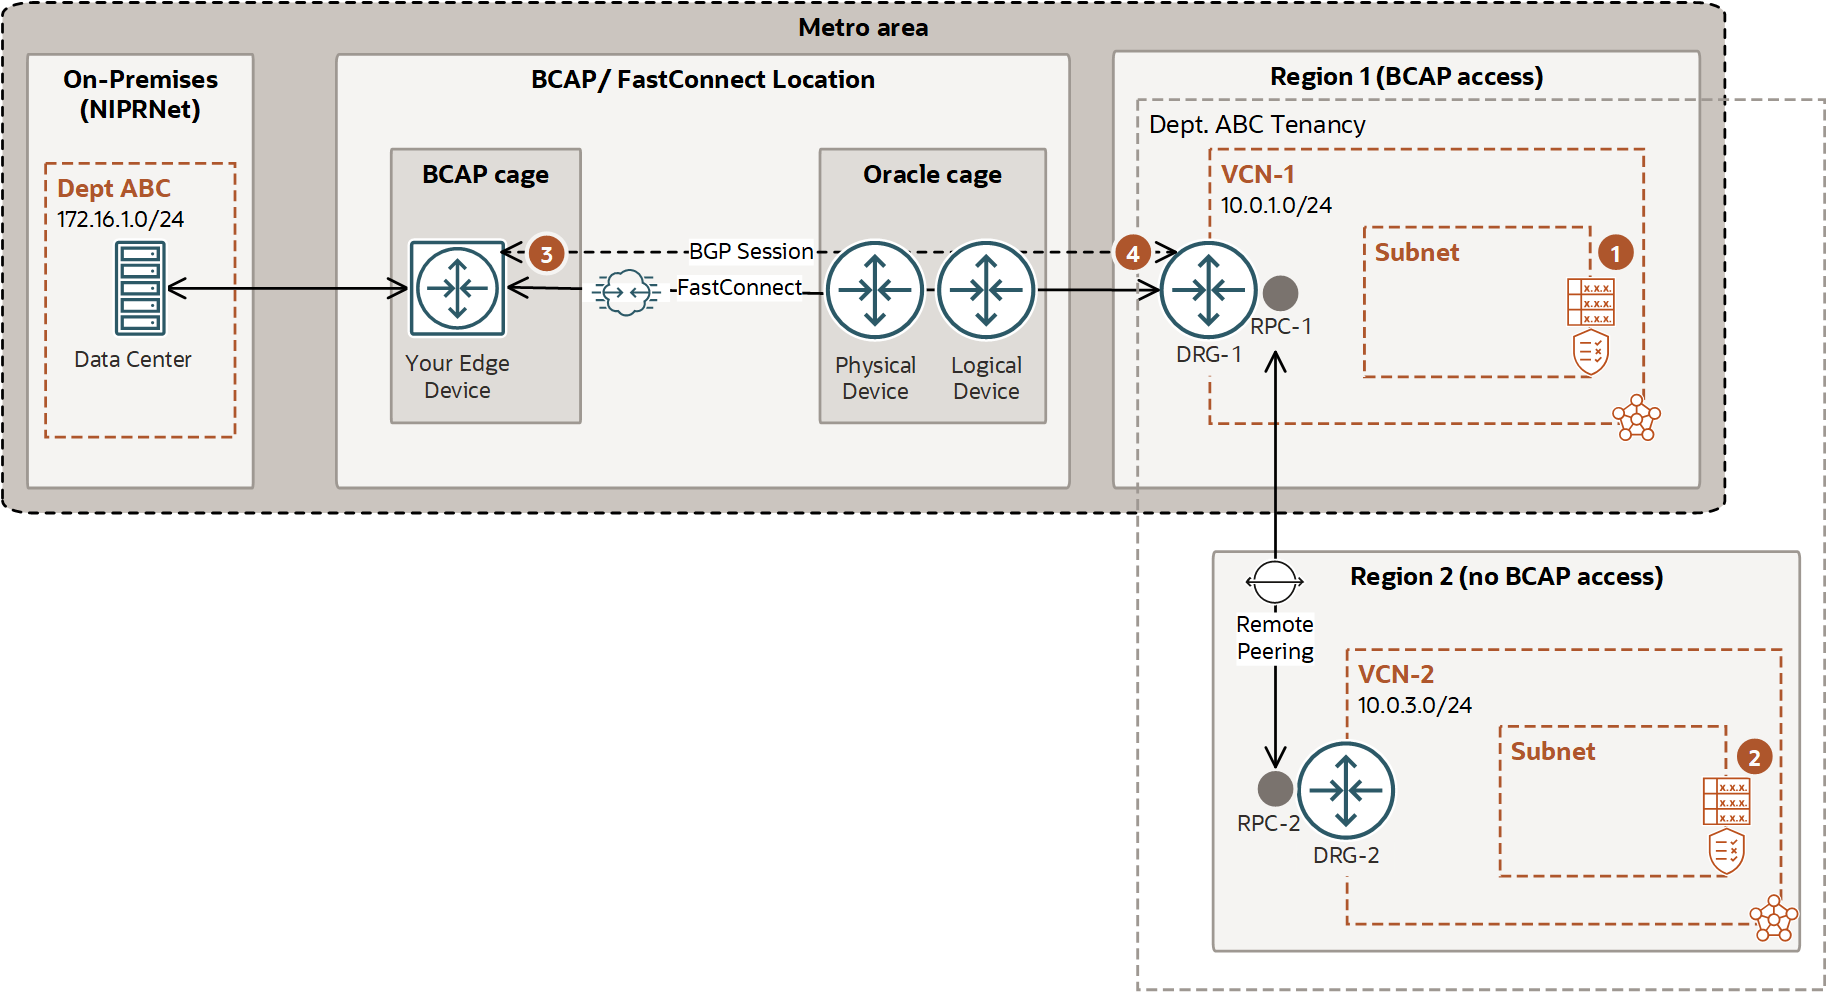 This image shows the layout of the NIPRNet connected to two different Oracle regions by way of FastConnect and remote peering.